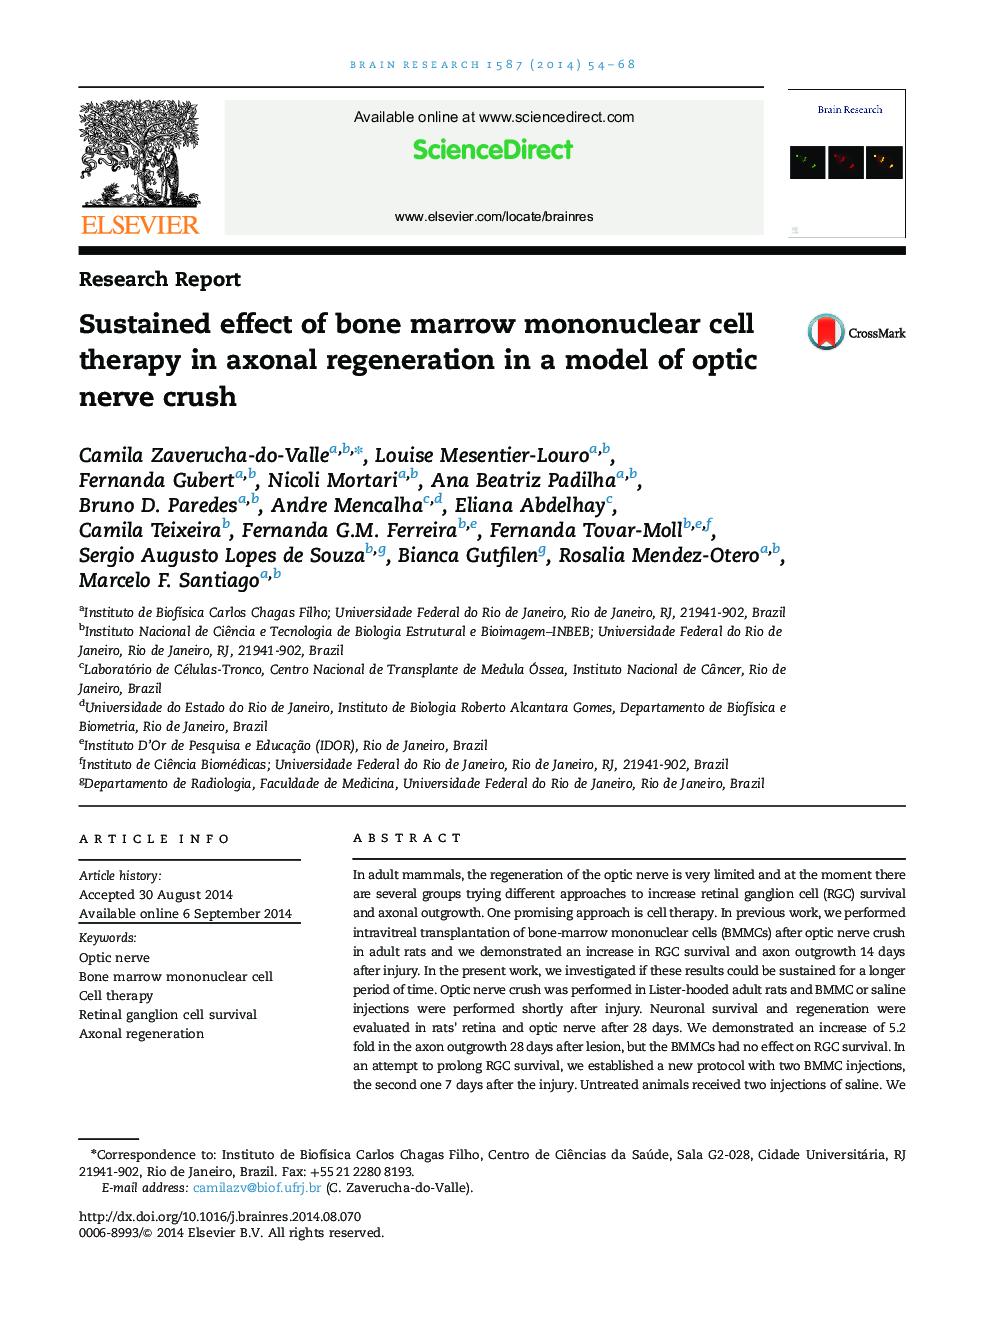 Research ReportSustained effect of bone marrow mononuclear cell therapy in axonal regeneration in a model of optic nerve crush